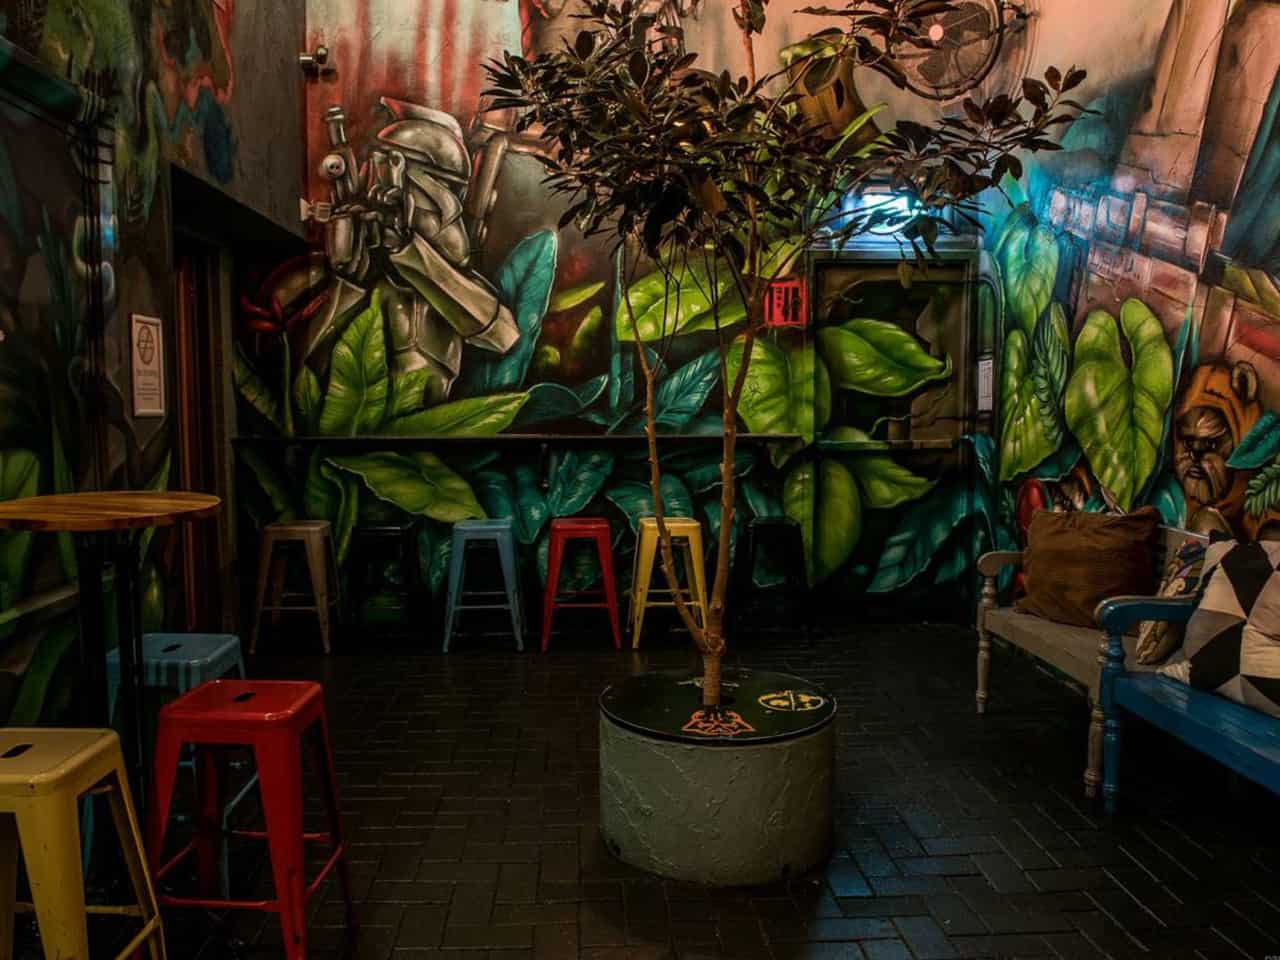 The Courtyard With Side Tables And Colorful High Chairs, Painted Walls, Pillows And A Small Tree